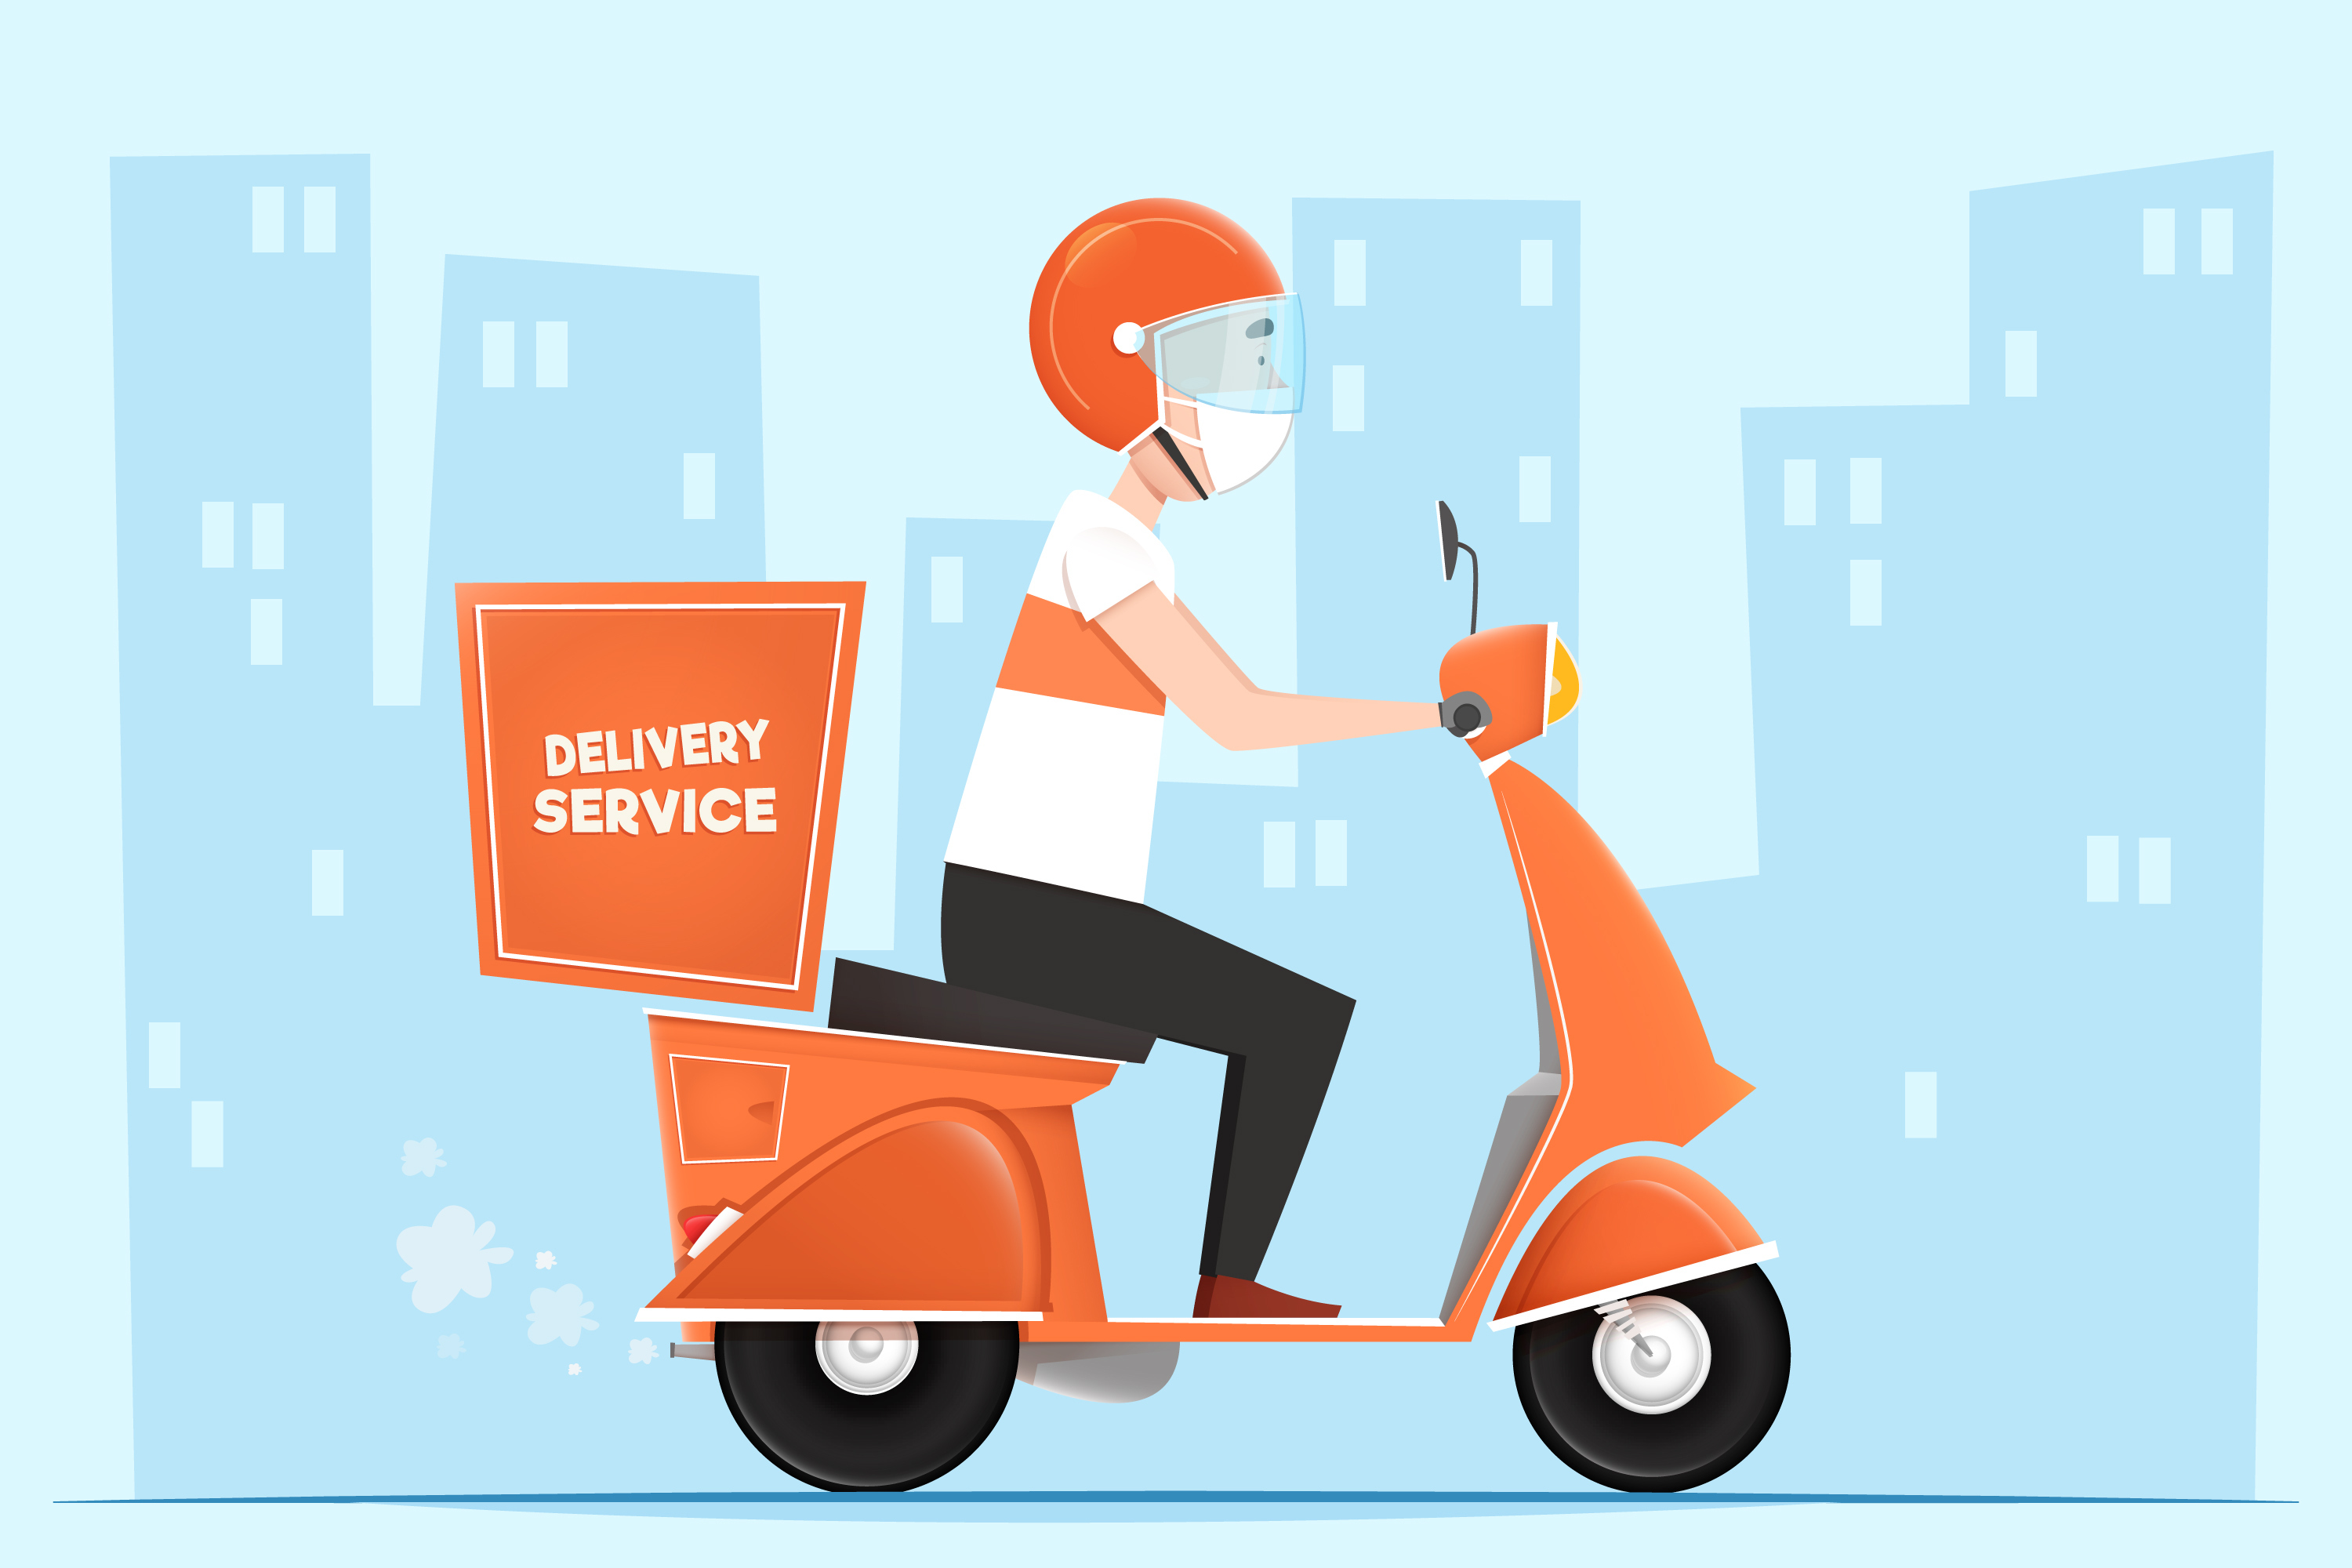 Swiggy Launches 'Delivering Safely' Nationwide Charter for Delivery Partner Safety